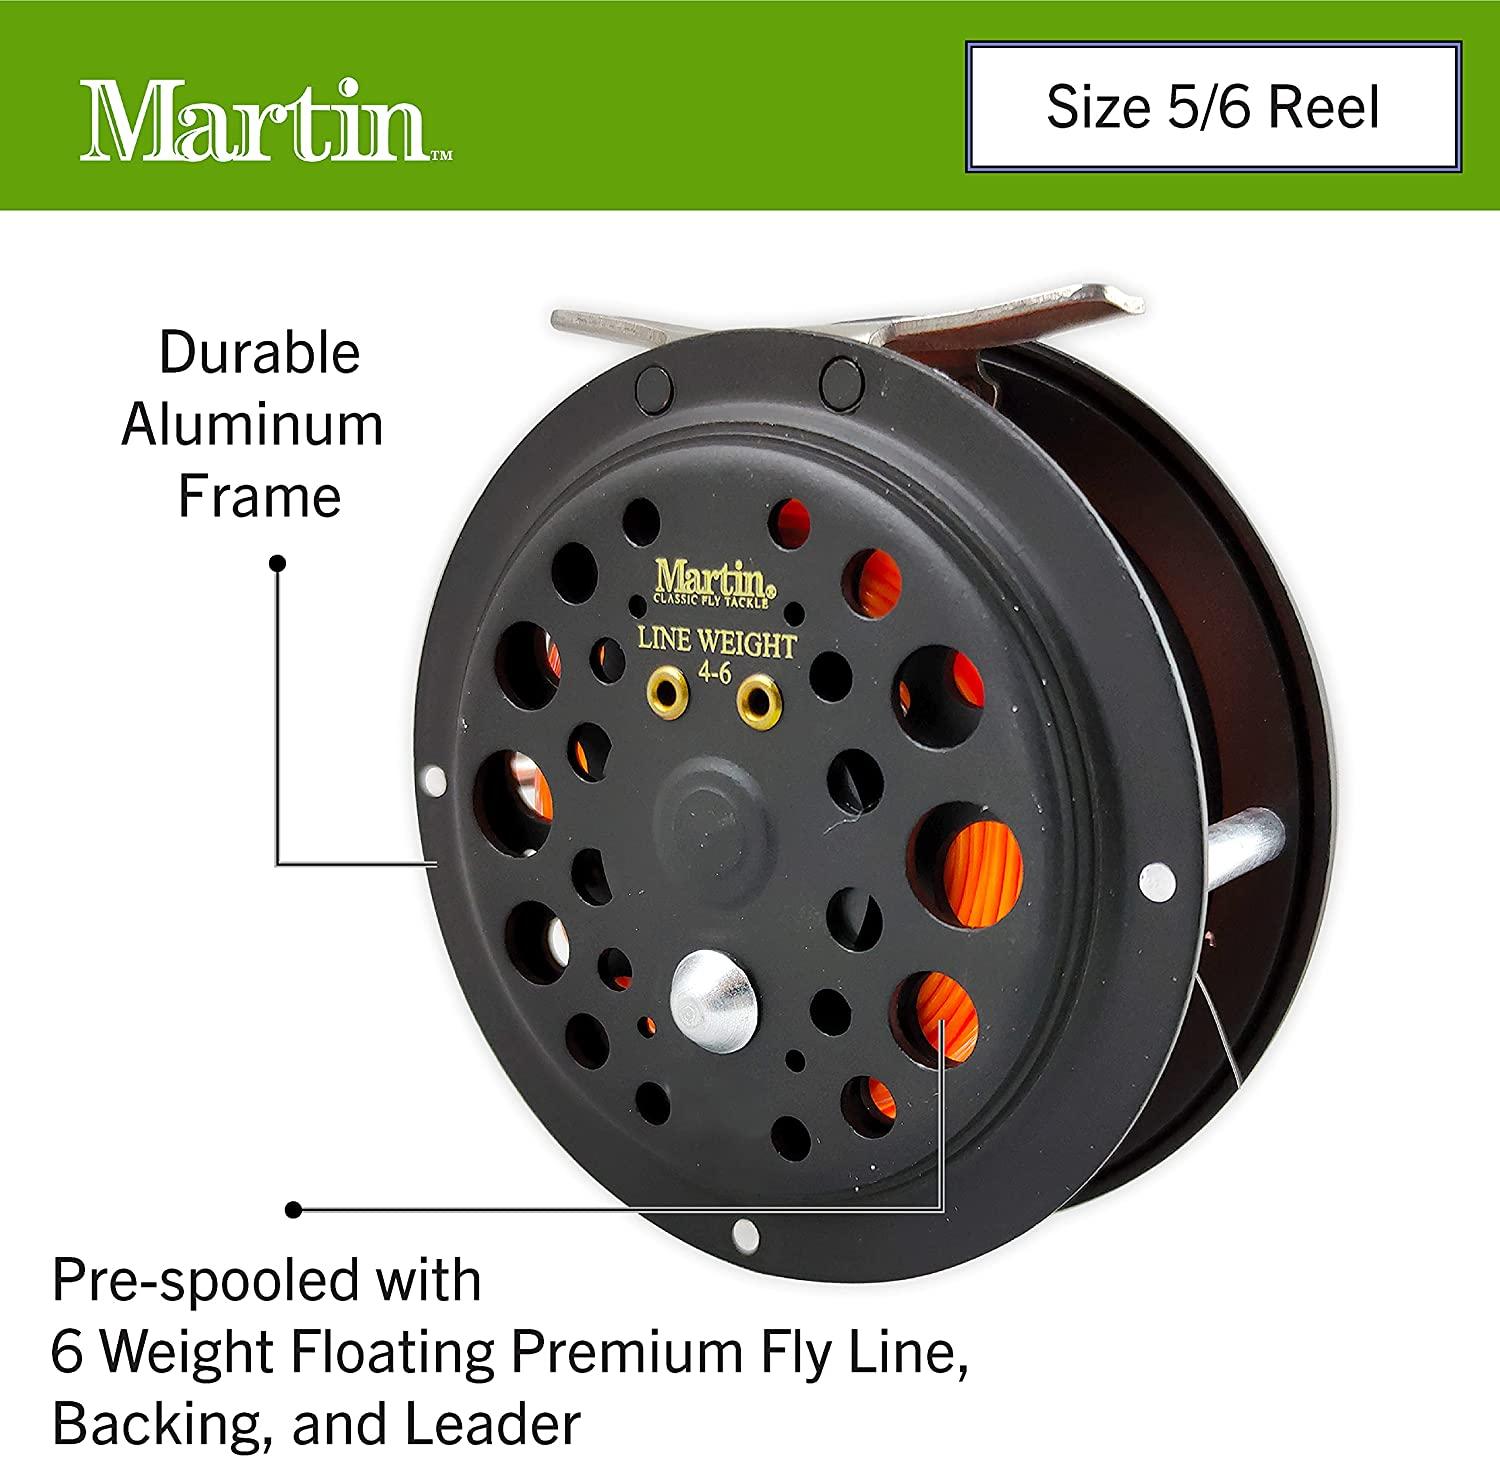 Martin Complete Fly Fishing Kit, 8-Foot 5/6-Weight 3-Piece Fly